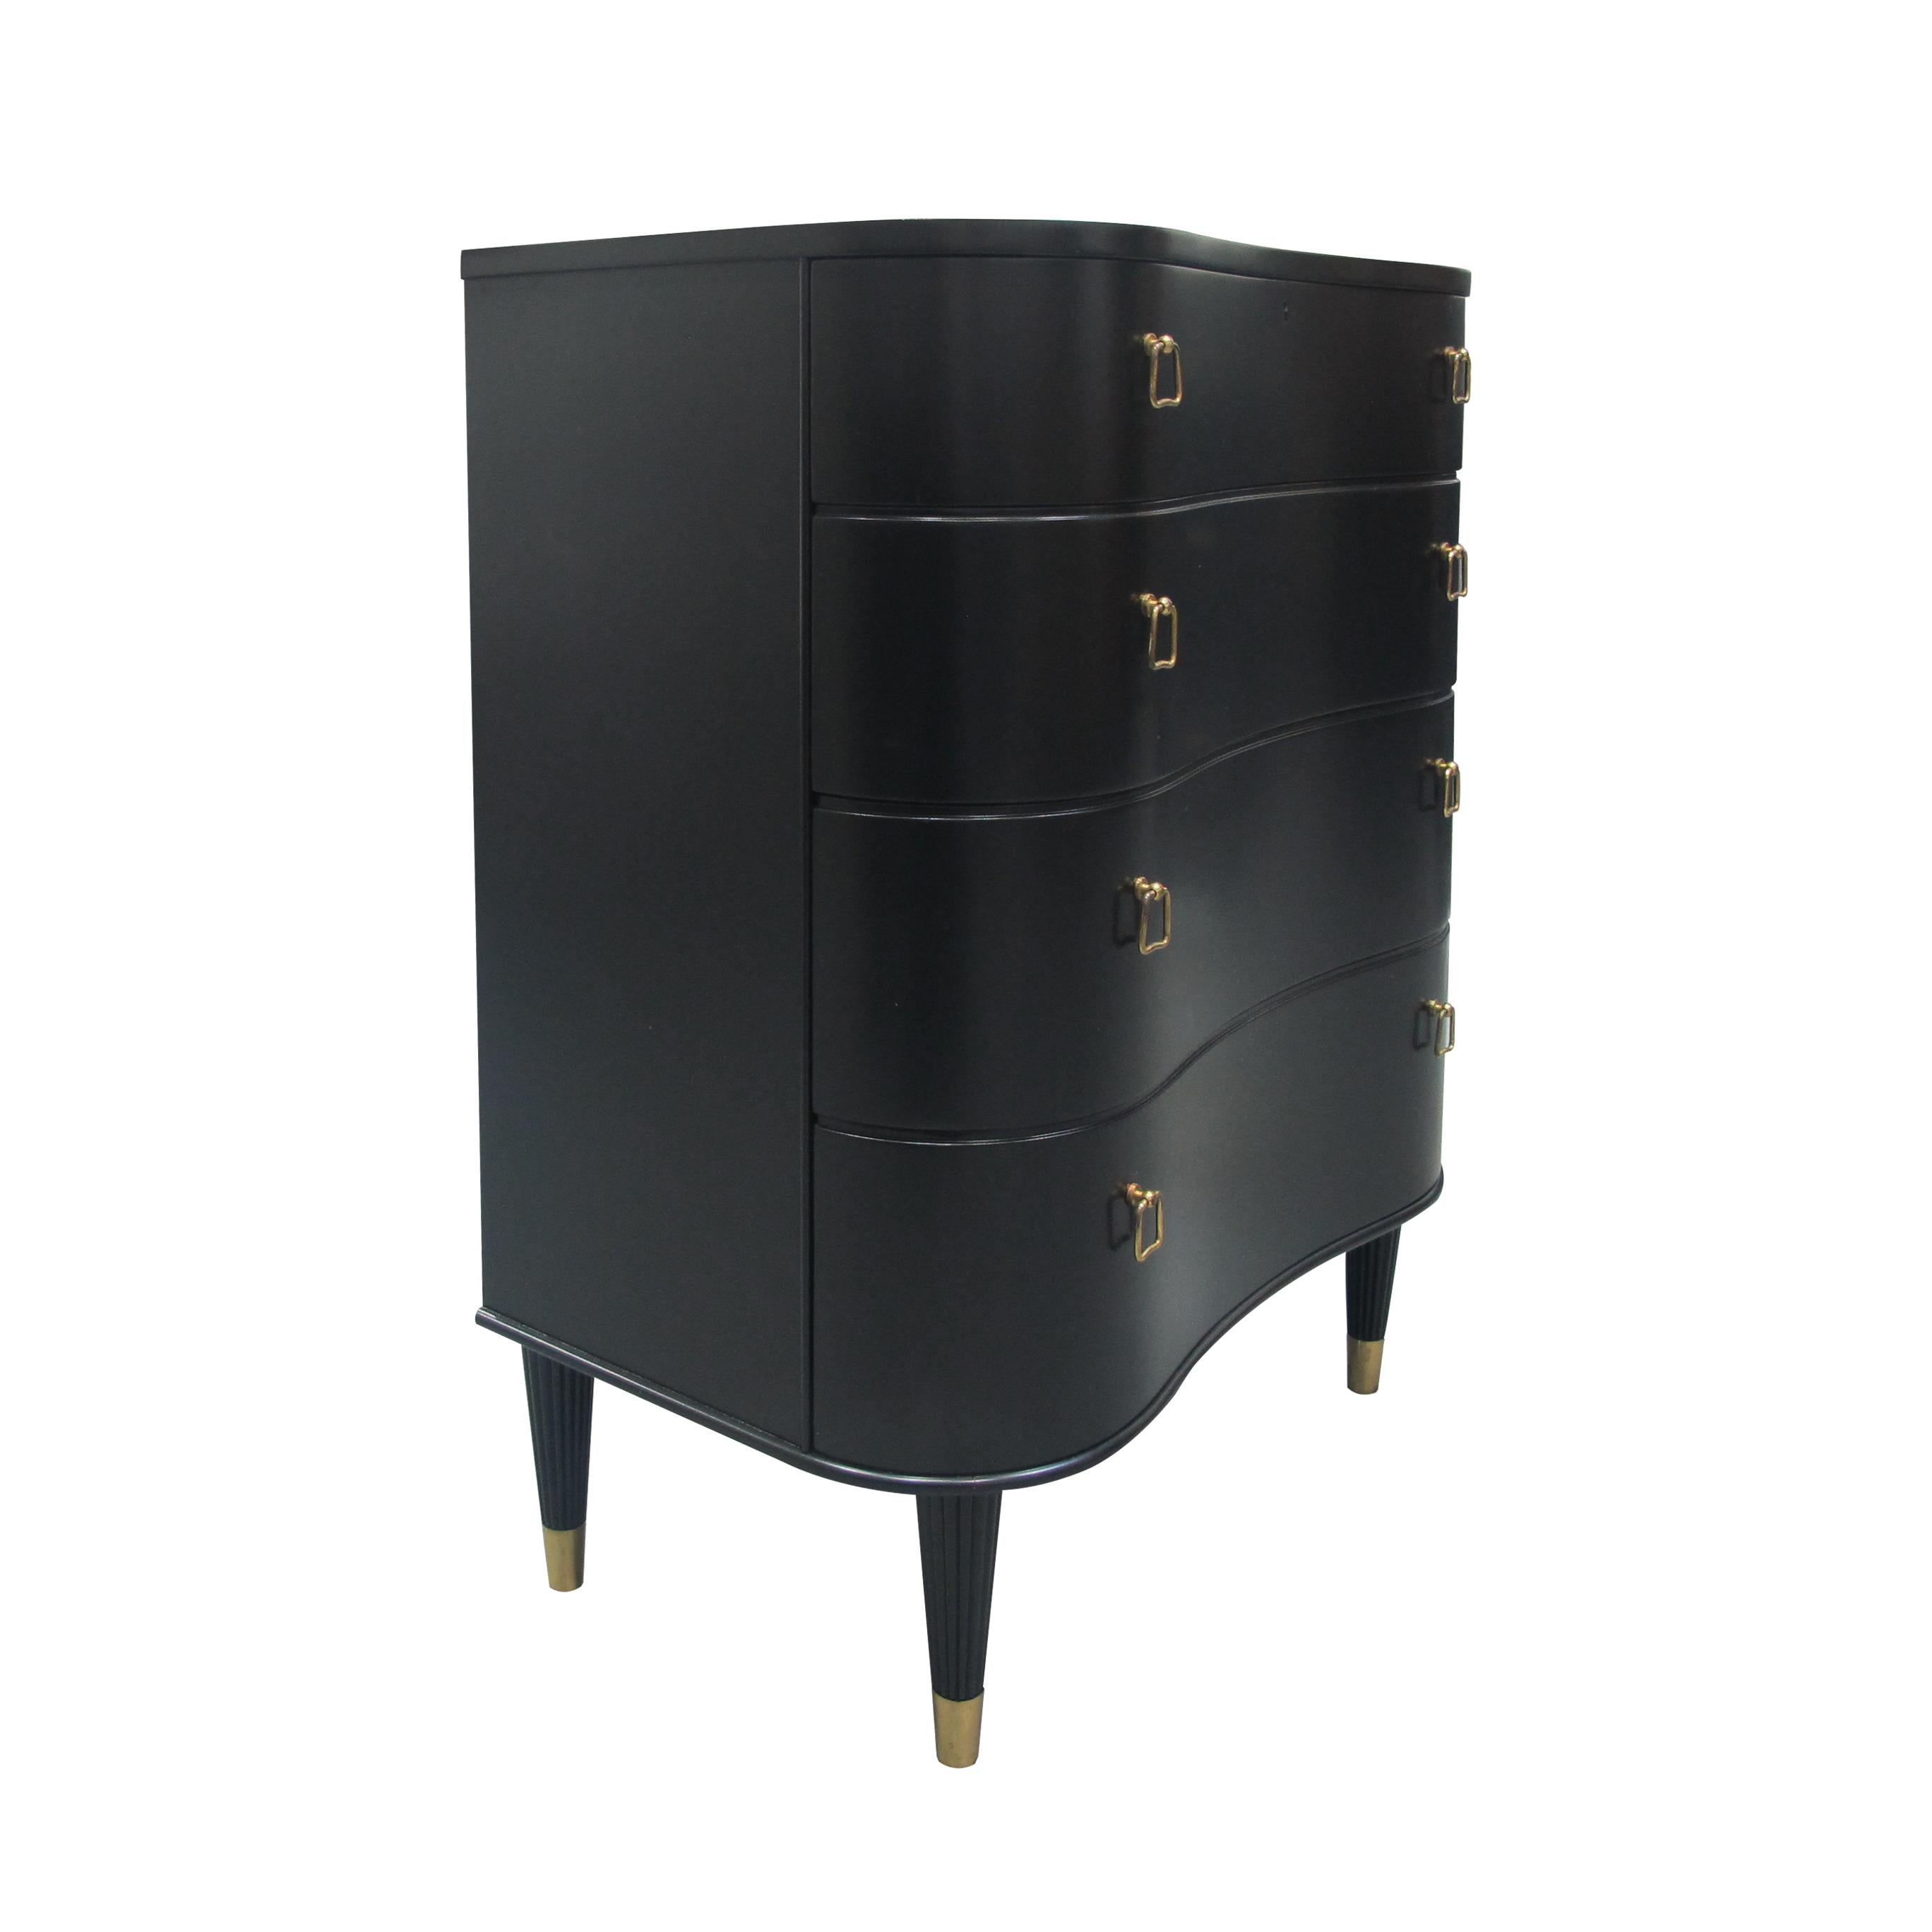 Mid-20th Century 1940s Swedish Curved Fronted Chest of Drawers with Four Drawers & Brass Handles